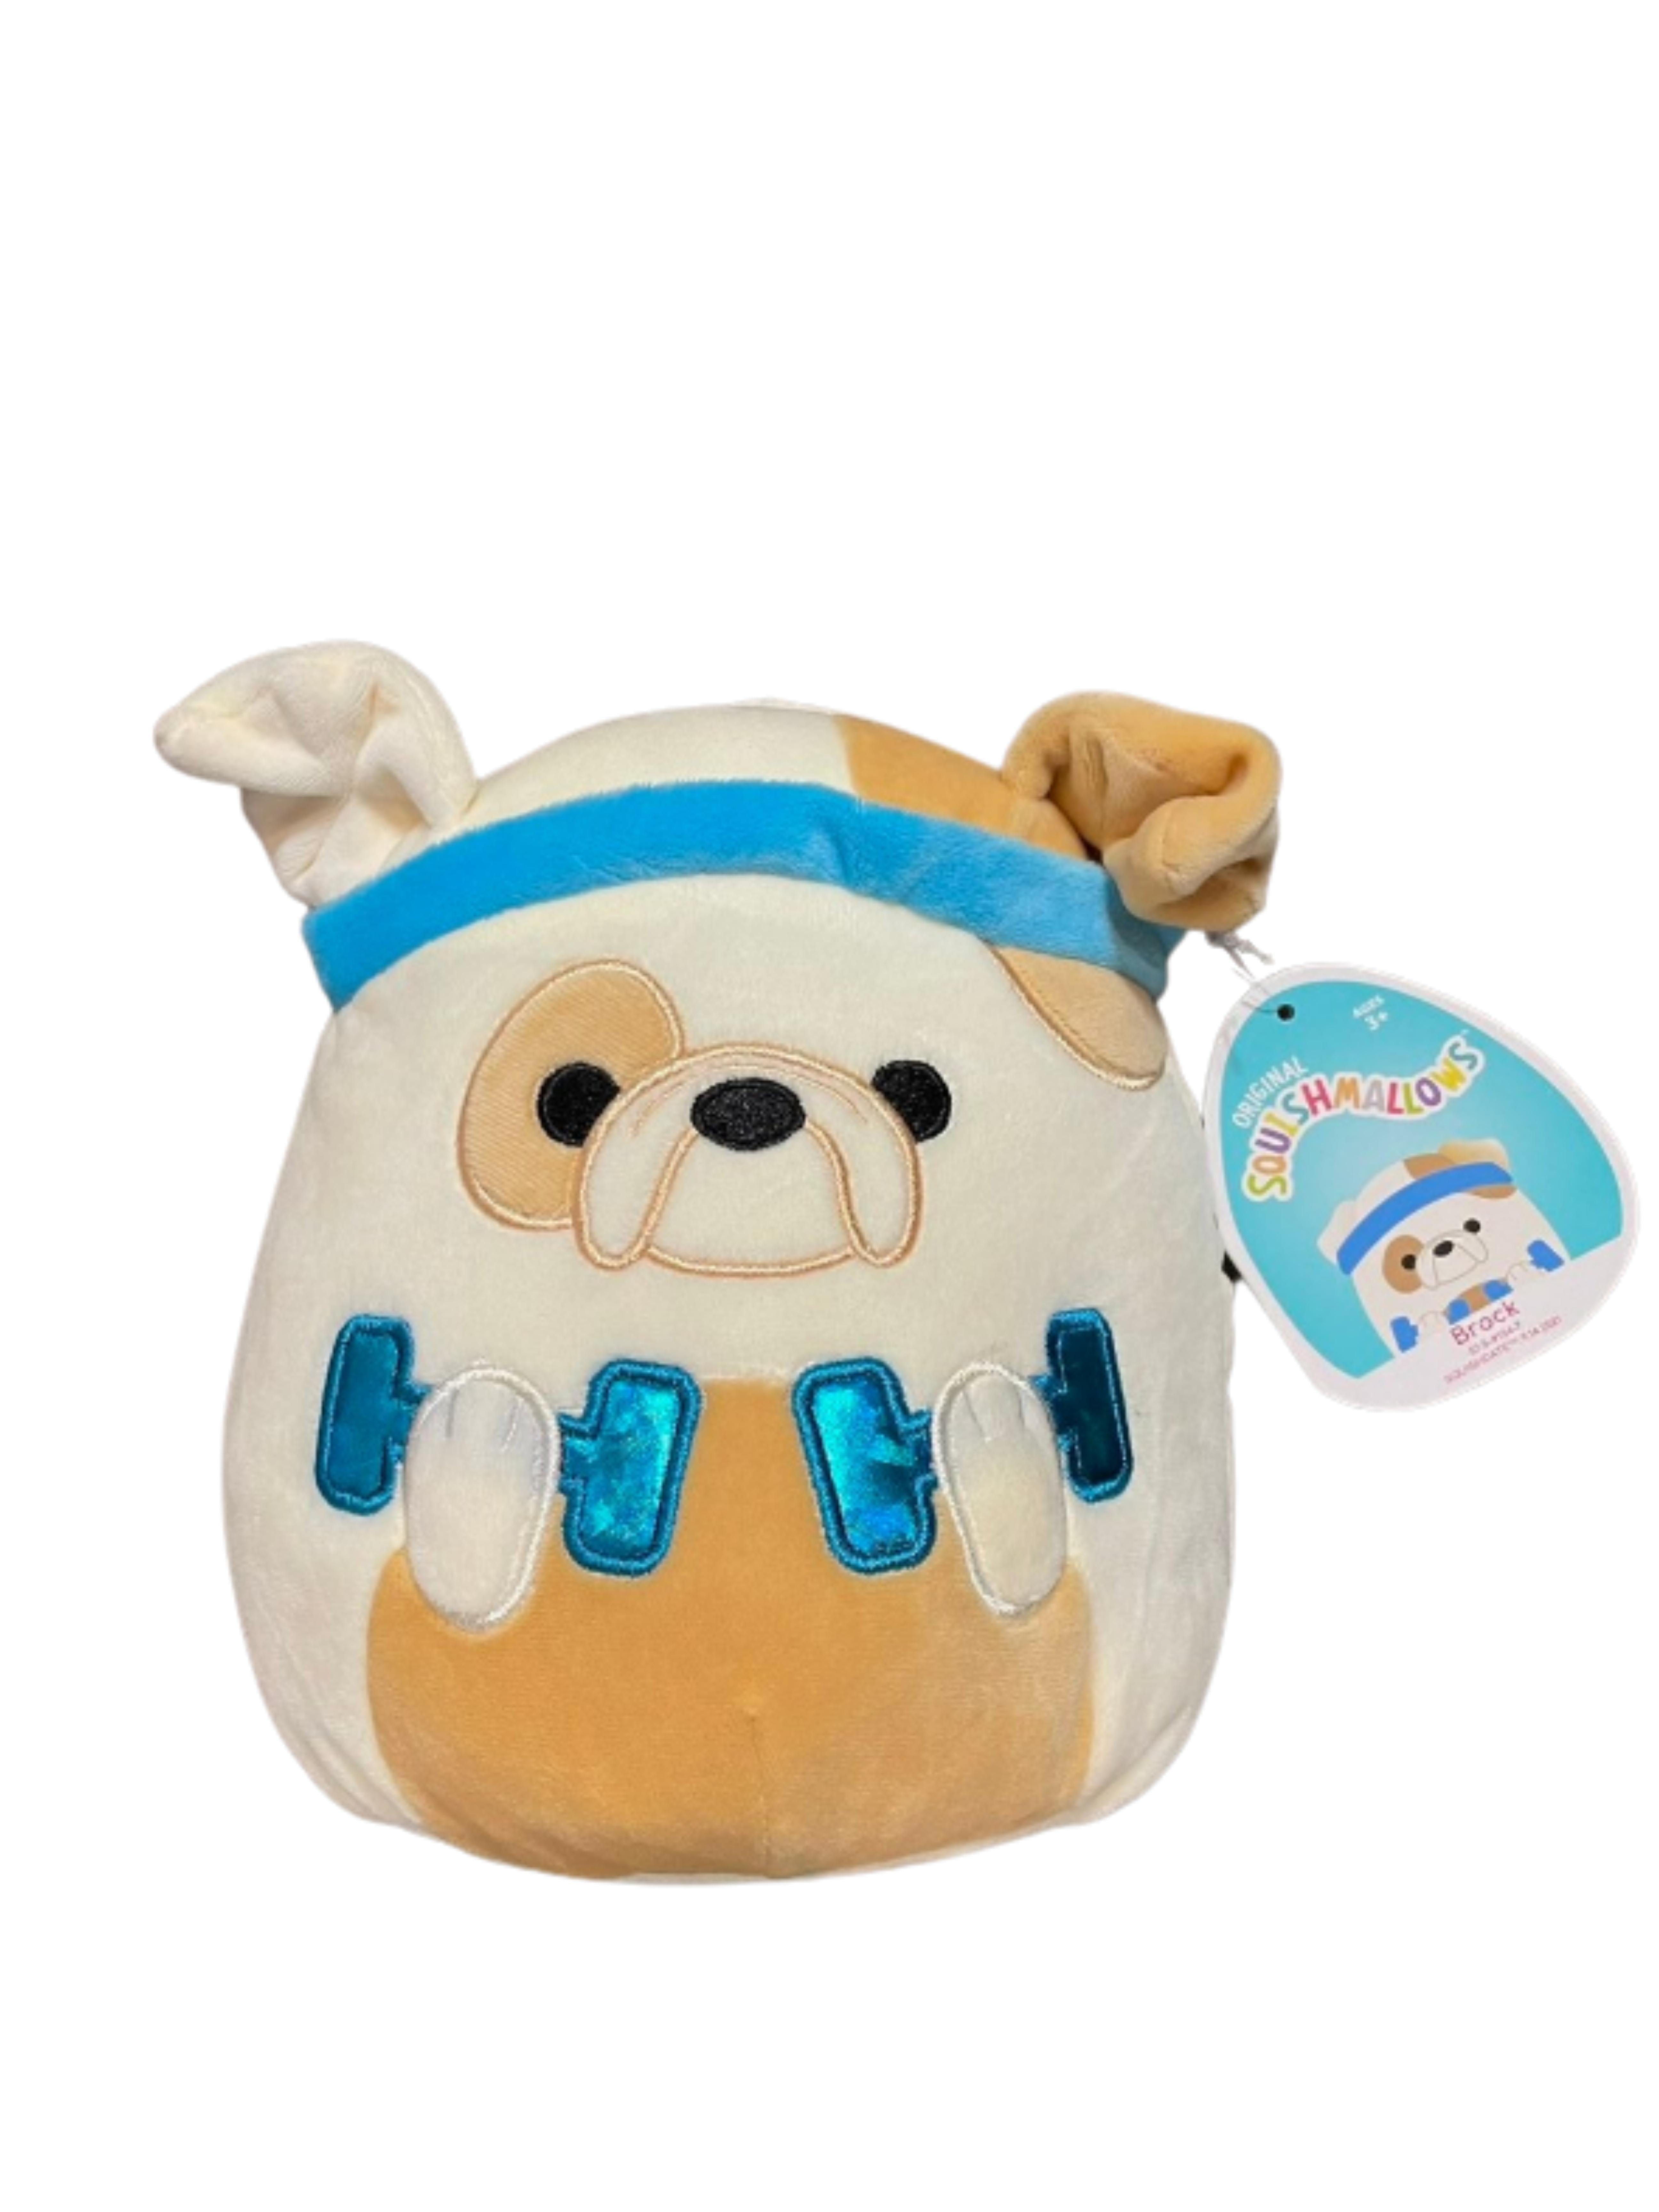 Squishmallows Brock the Bulldog 8 inch Plush Toy for sale online 